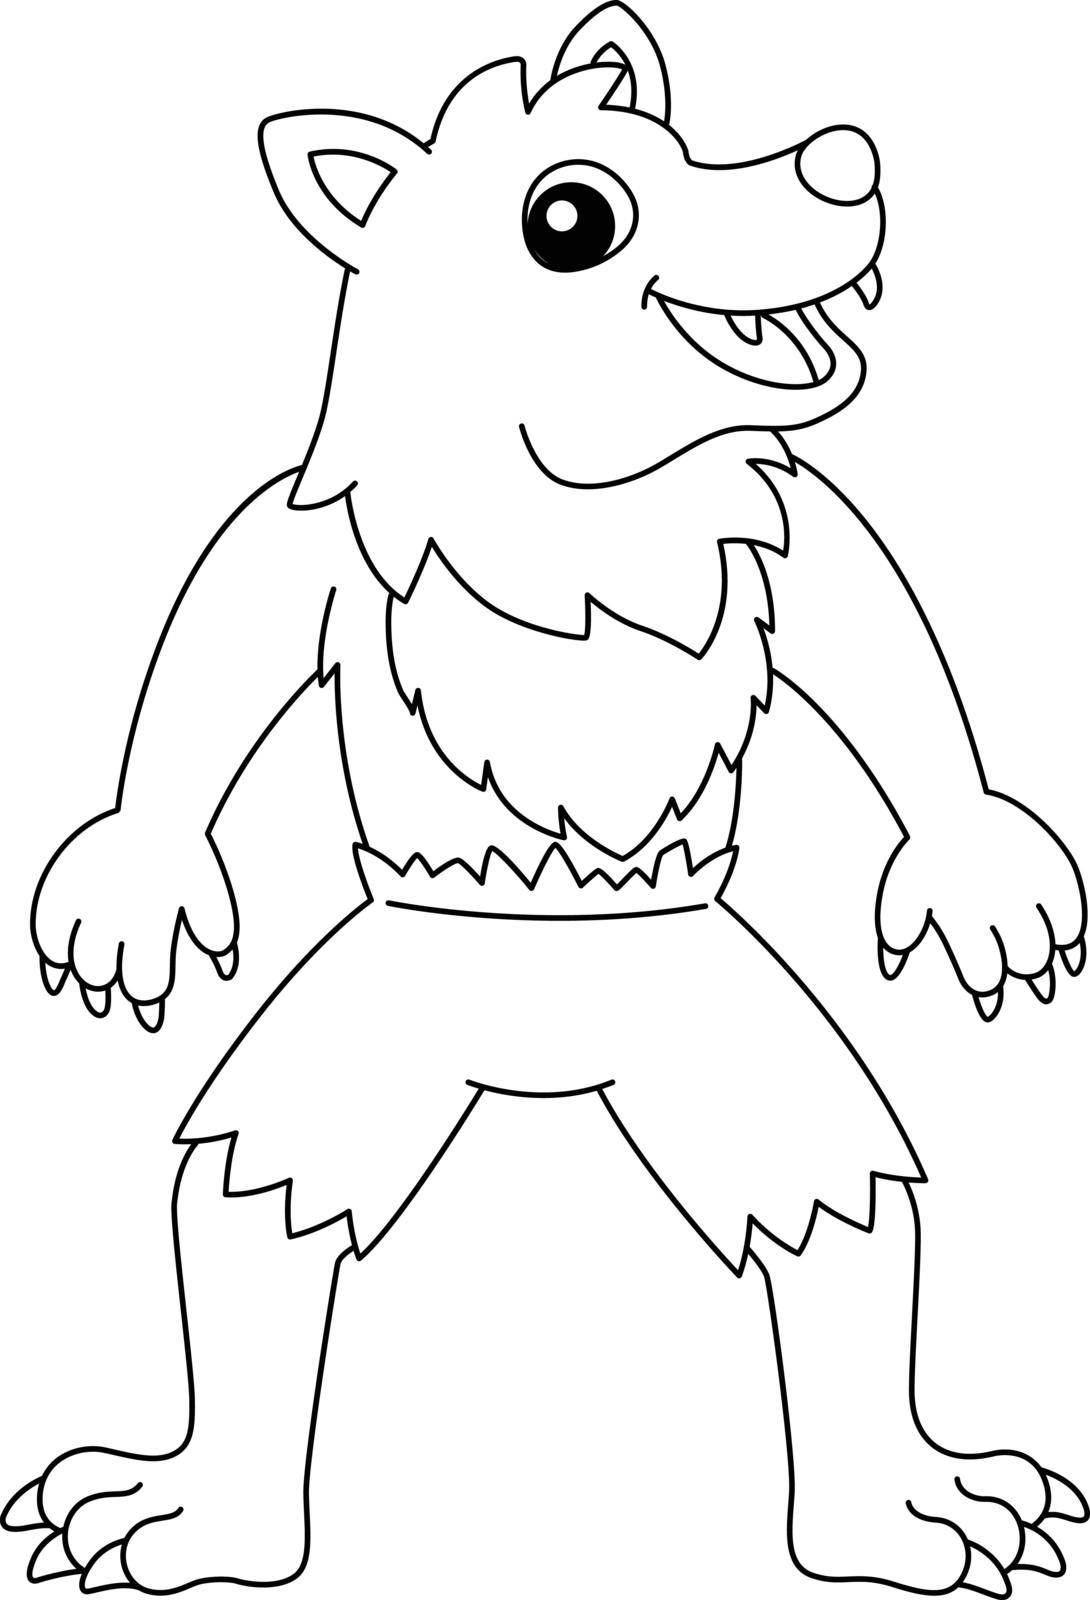 Werewolf Halloween Coloring Page Isolated for Kids by abbydesign